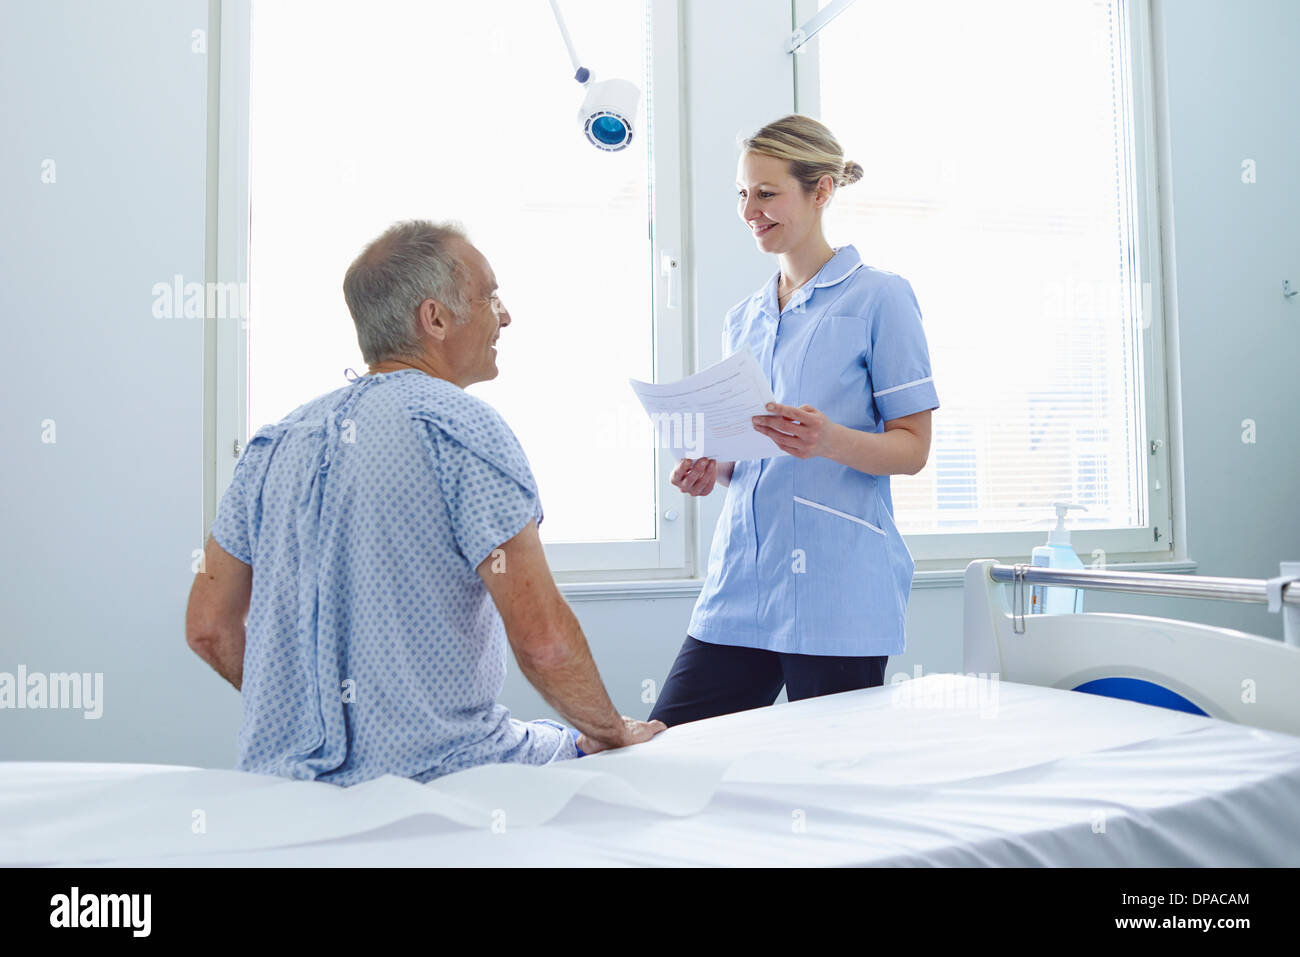 Nurse talking to patient sitting on hospital bed Banque D'Images